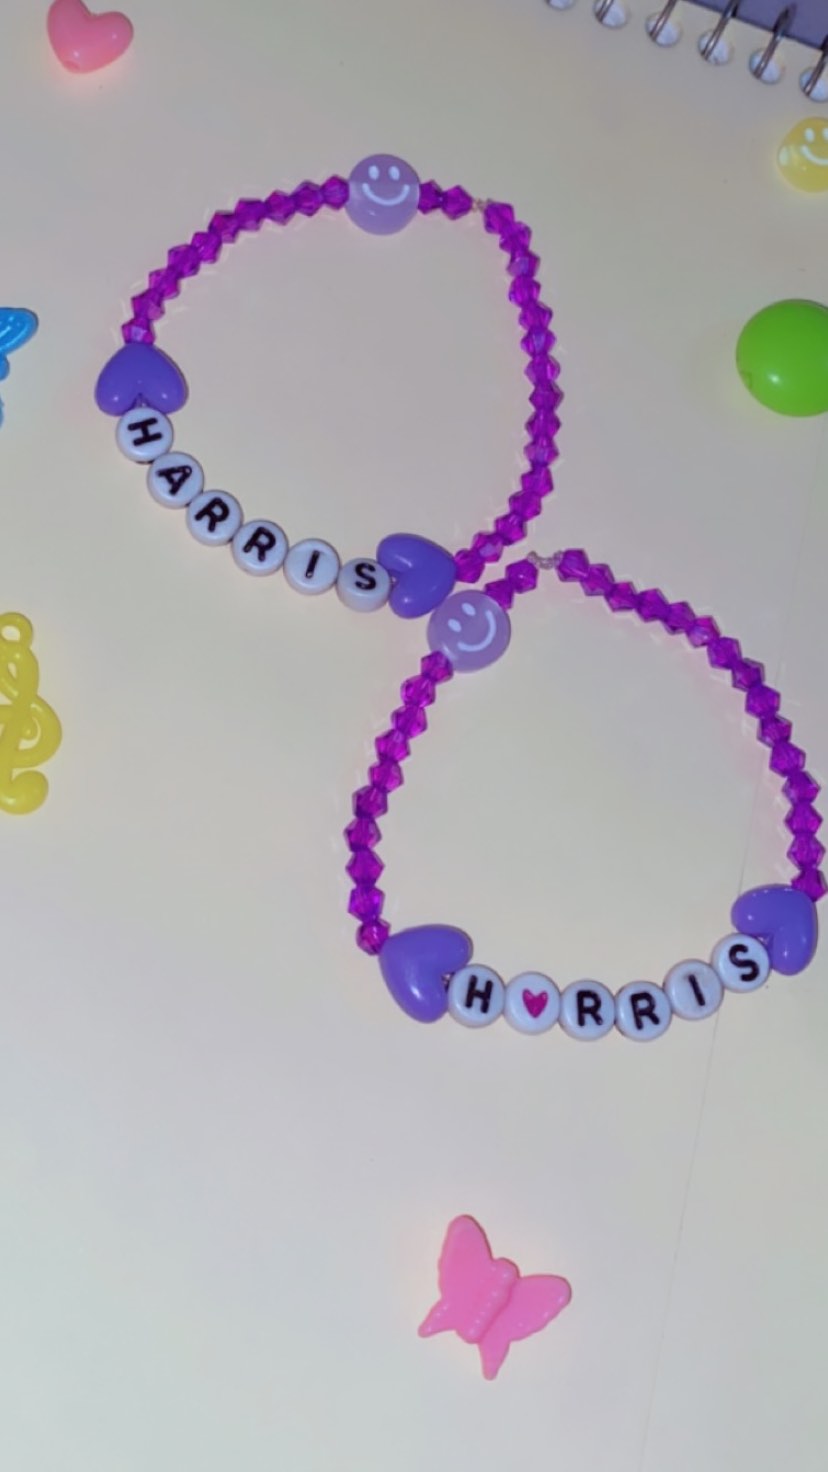 Close-up of two purple beaded bracelets spelling ‘HARRIS’, surrounded by colorful hearts and a butterfly beed on a light background.